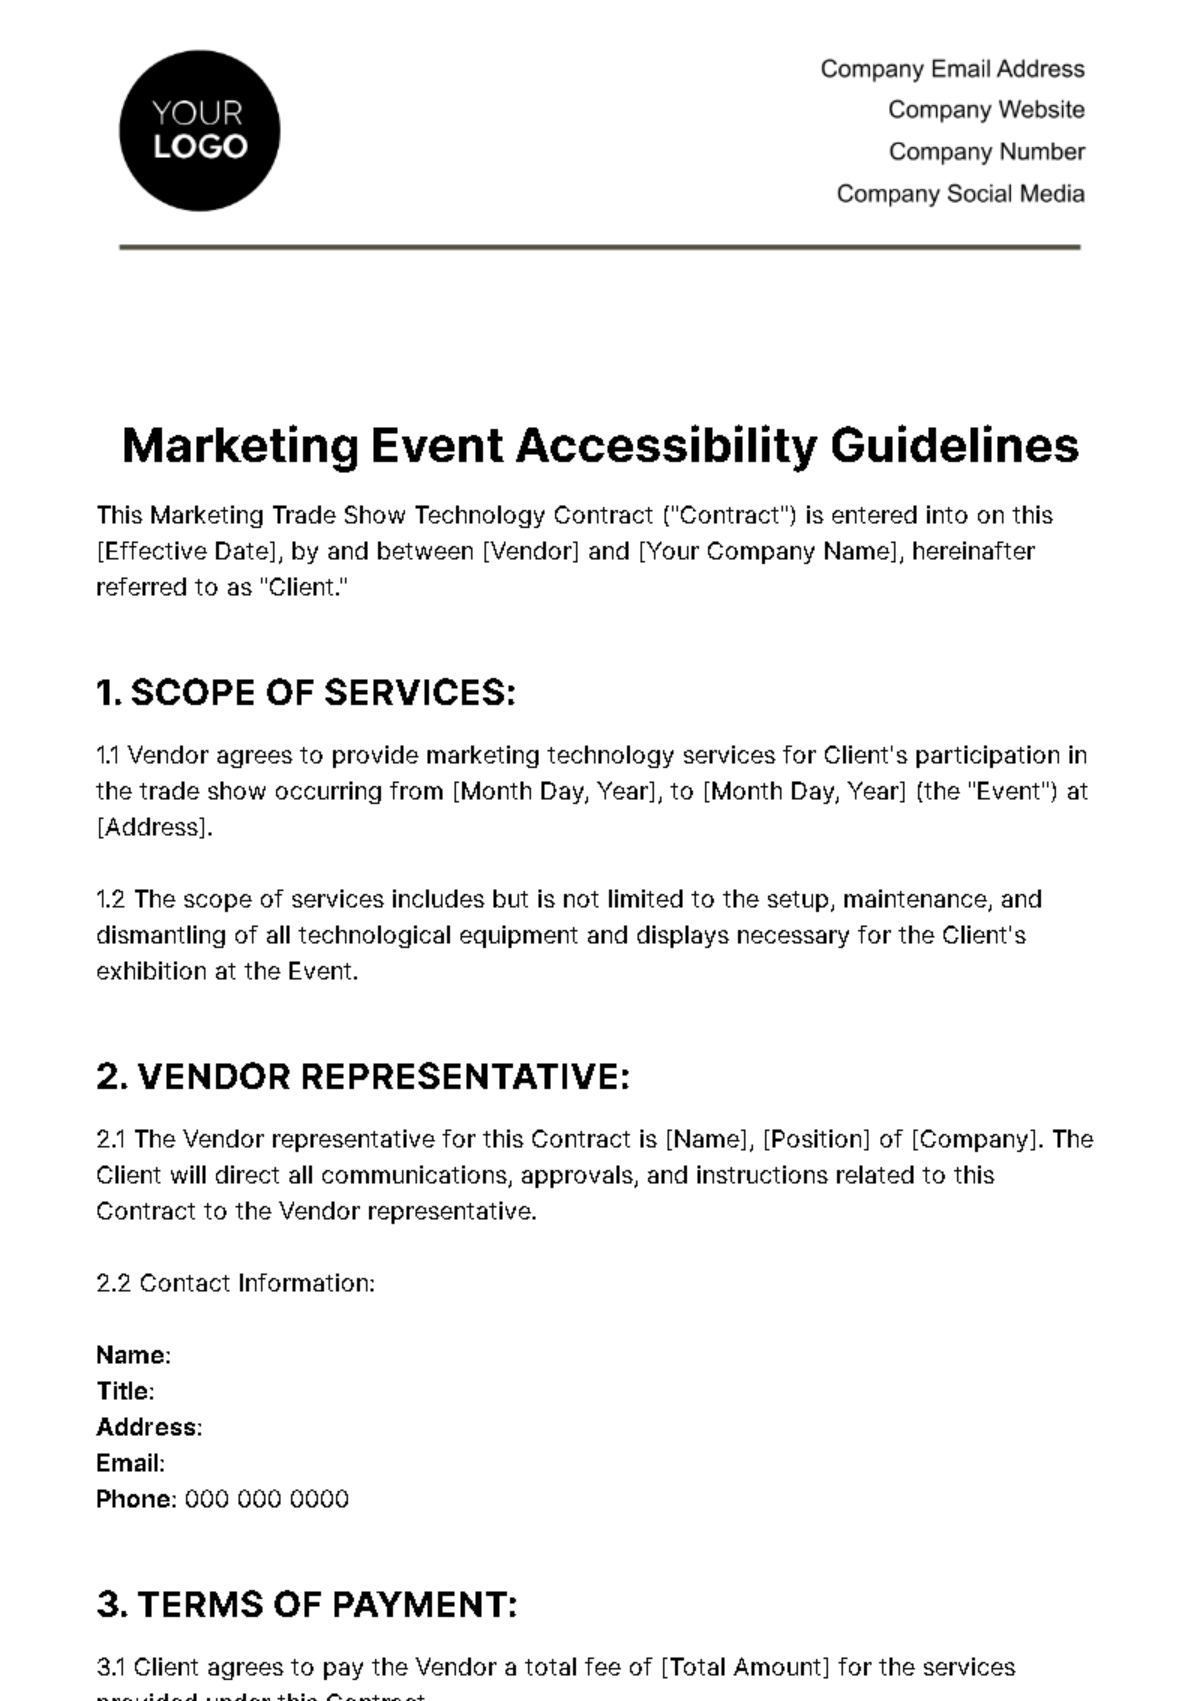 Free Marketing Event Accessibility Guidelines Template